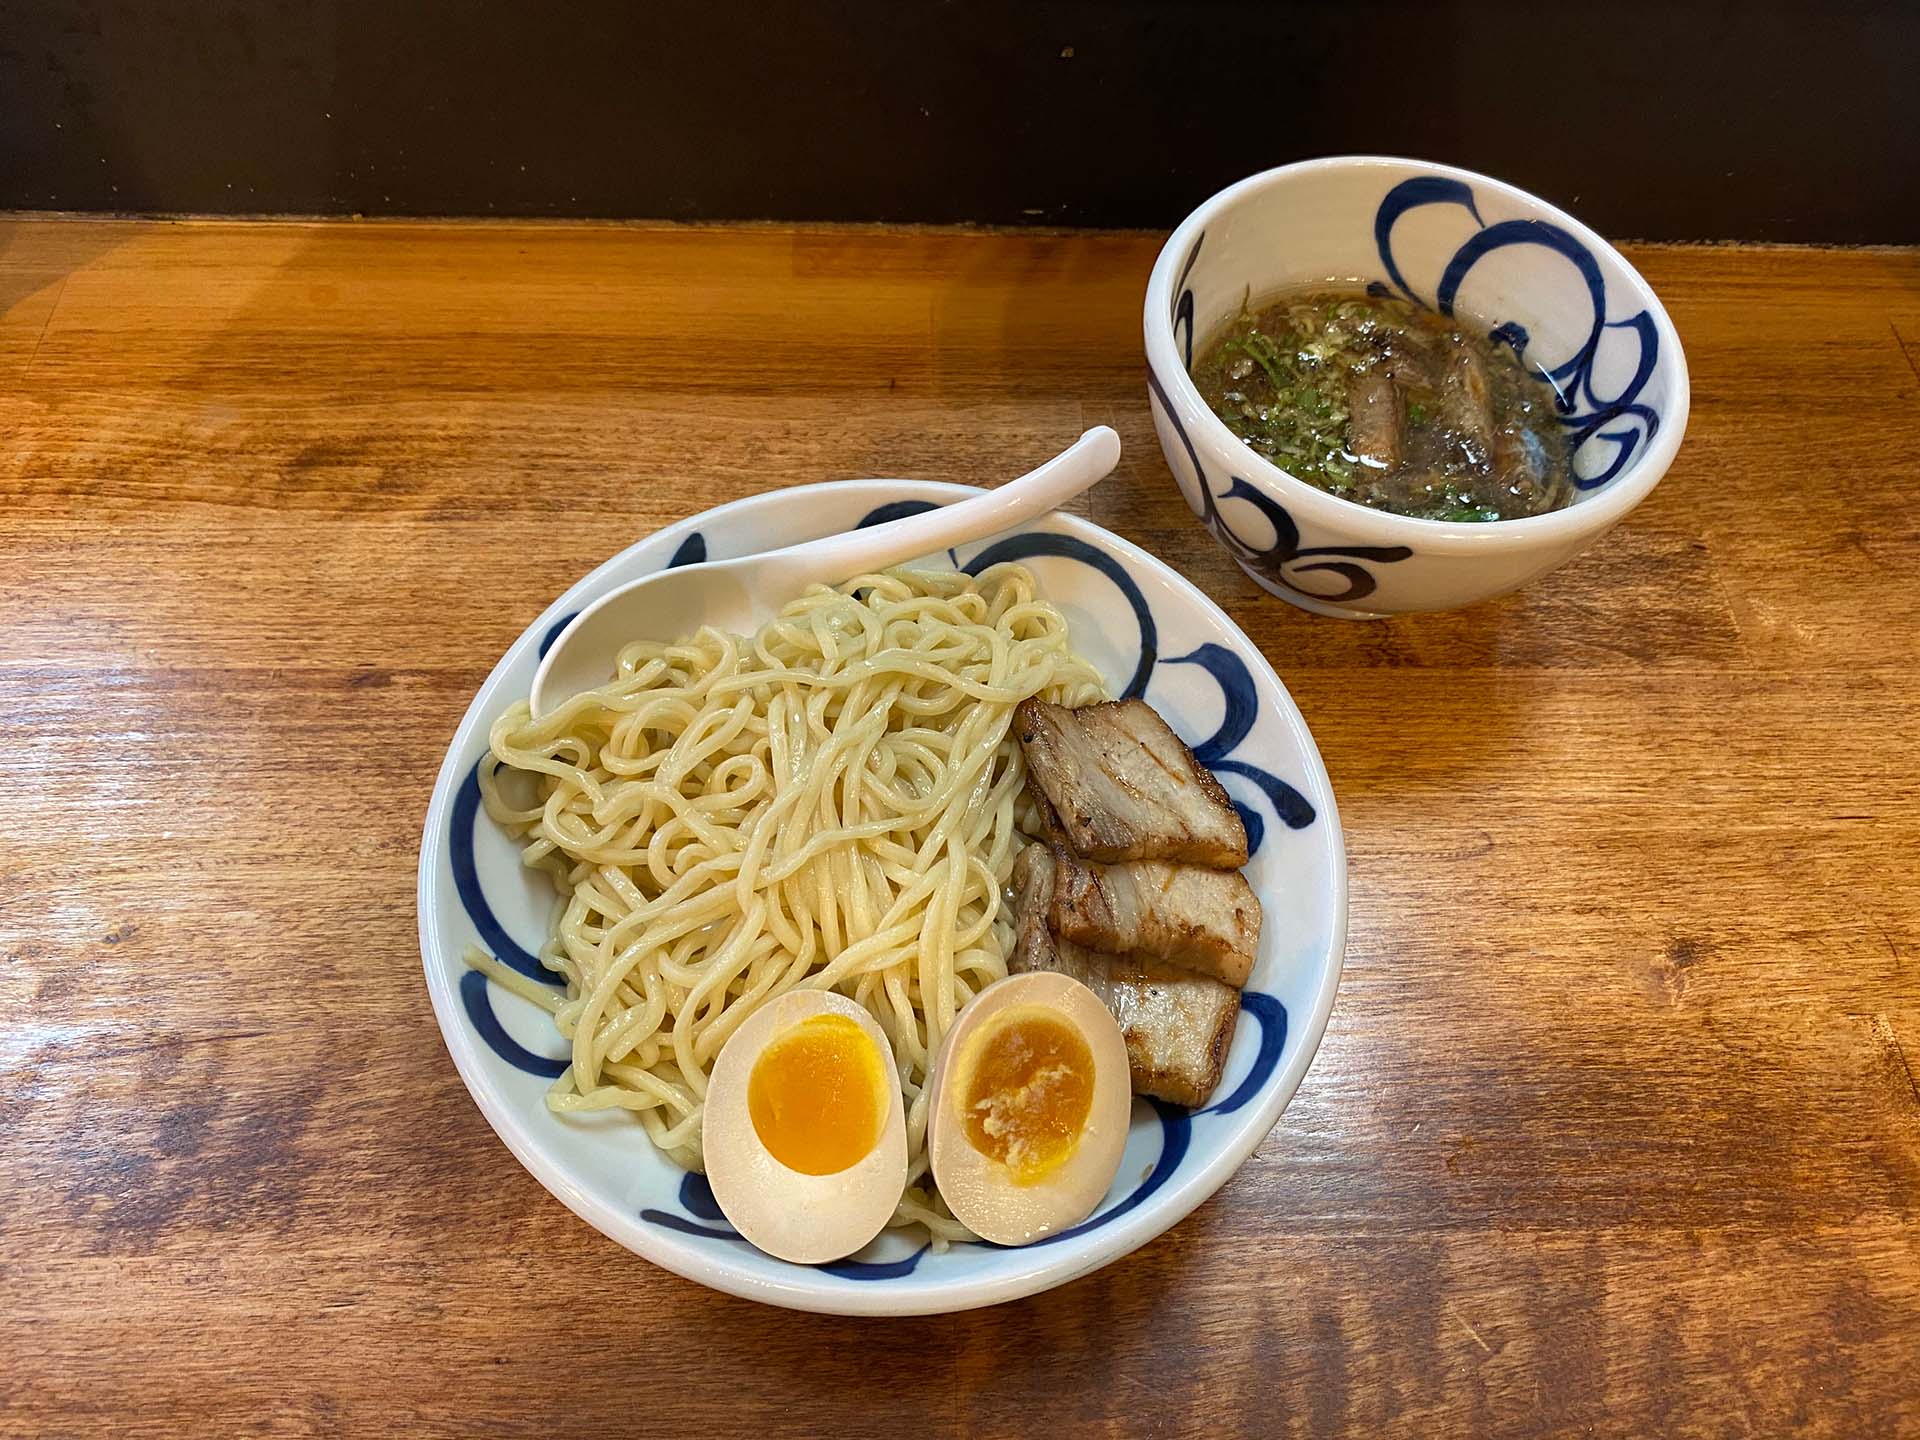 A bowl of cold ramen noodles topped with grilled pork belly and a halved soft-boiled egg, with dipping broth served in a separate small bowl on the side.